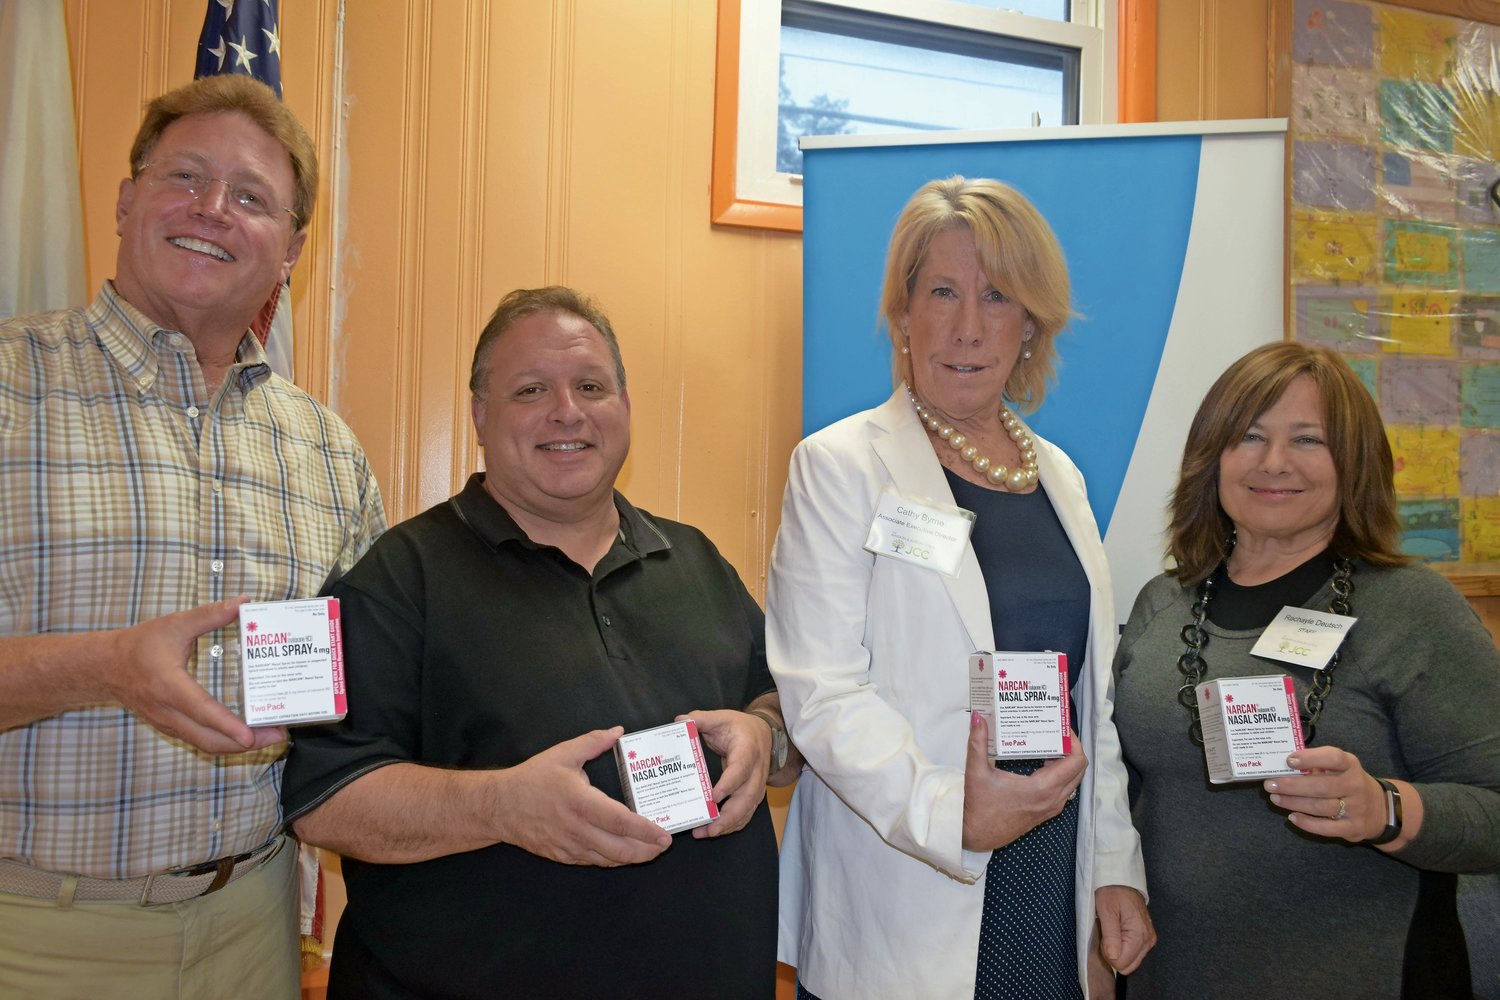 The drug coalition took shape after the Gural JCC hosted a Narcan training last August. From left in 2018 were JCC President Steve Bernstein; David Hymowitz, education director for the Nassau County Department of Human Services; JCC Associate Director Cathy Byrne; and Rachayle Deutsch, the JCC’s director of cultural arts and education.